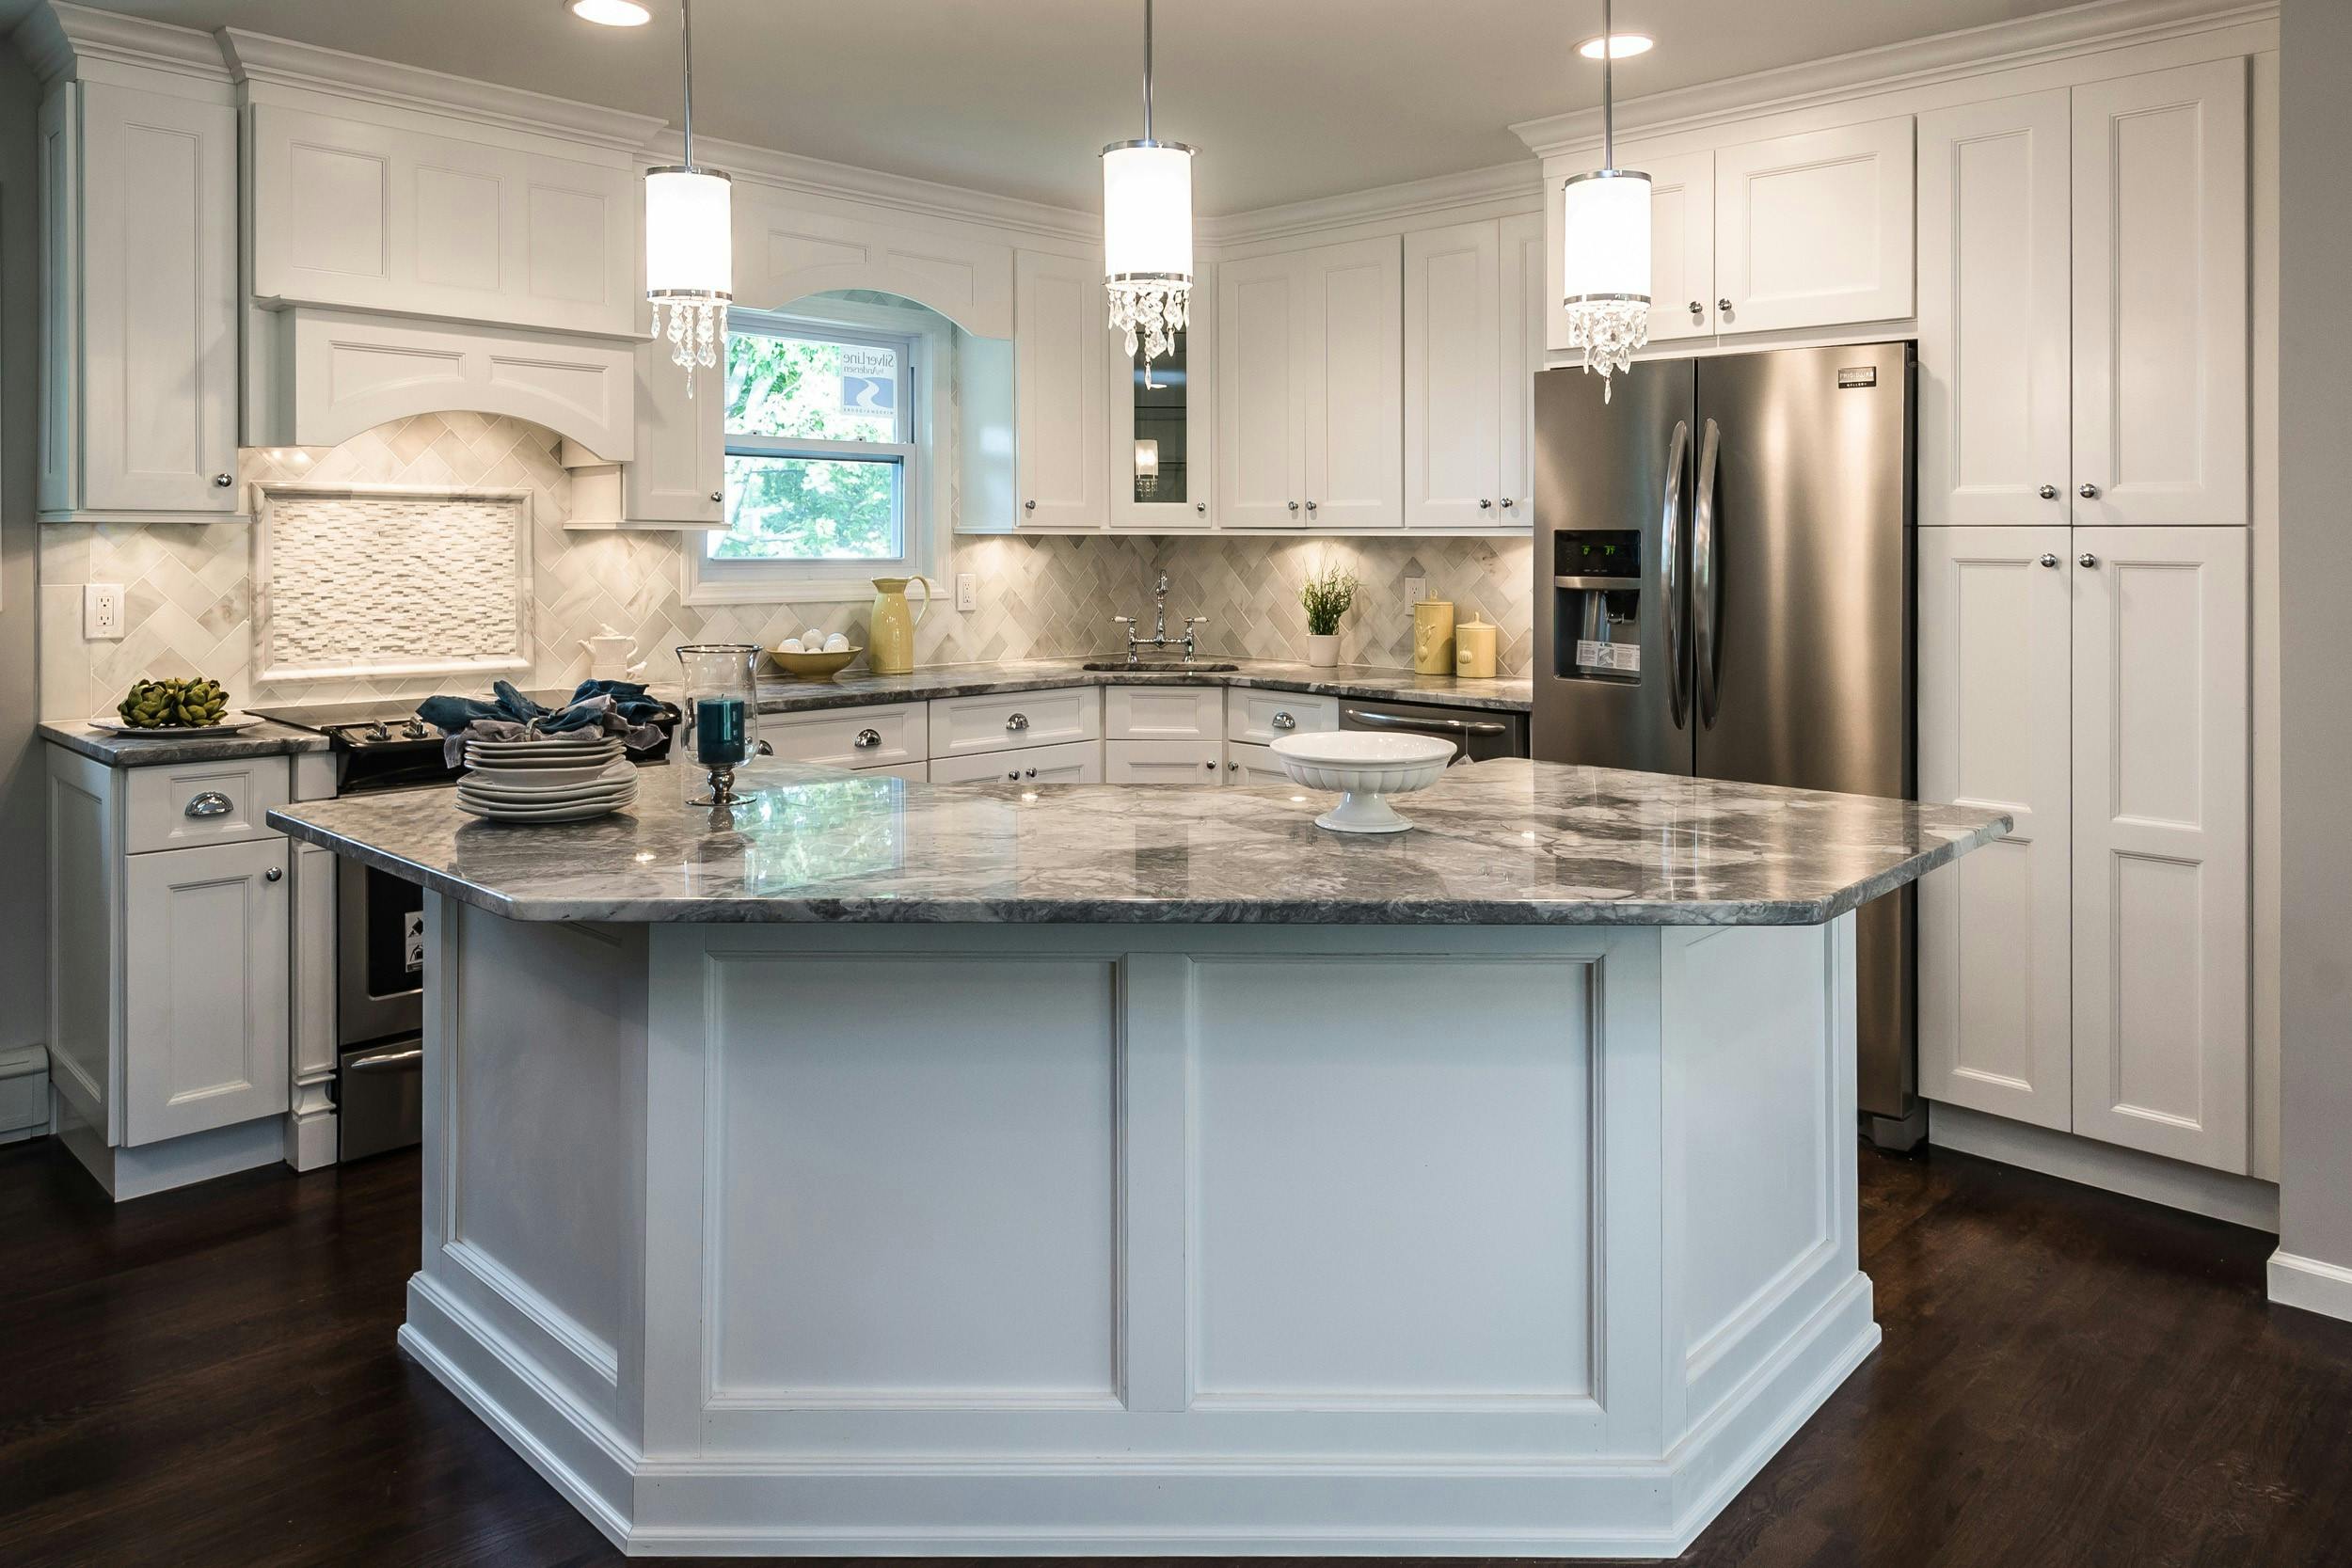 Https Wwwfabuwoodcom Post How To Find Best Cabinets For Countertops